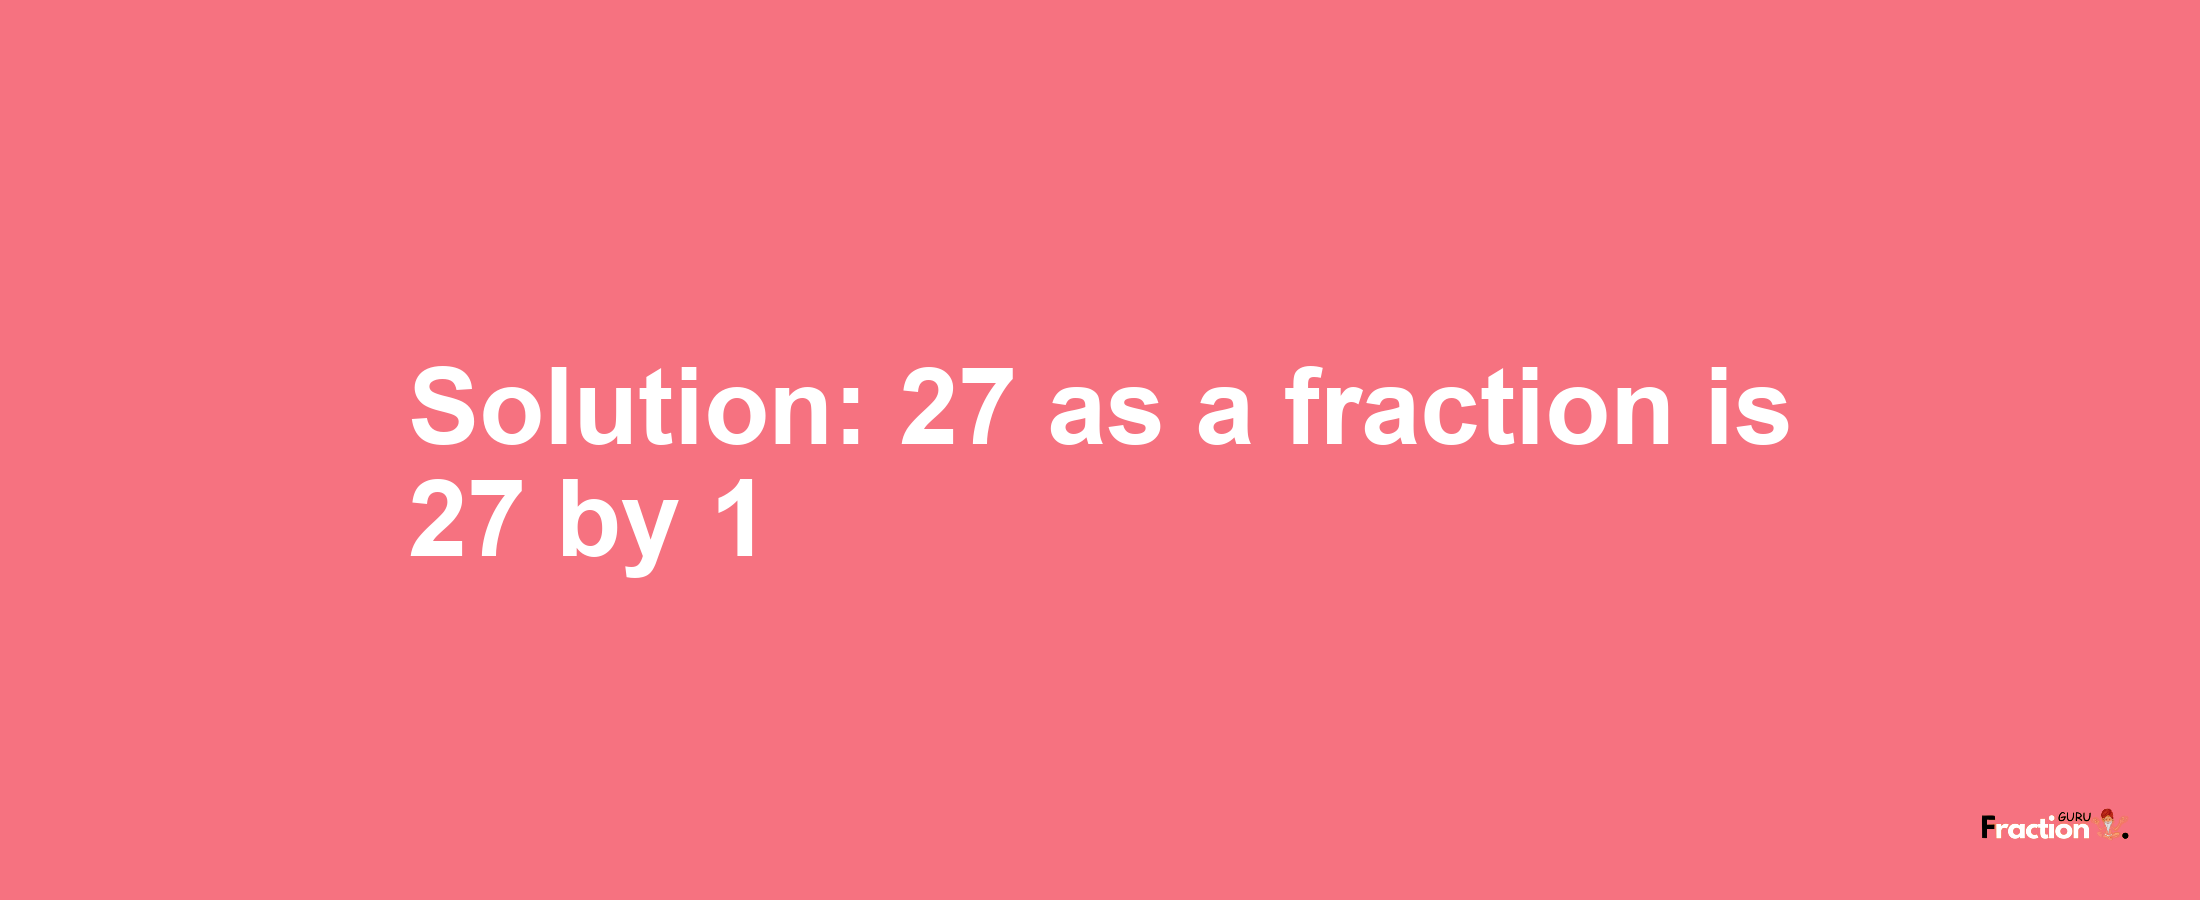 Solution:27 as a fraction is 27/1